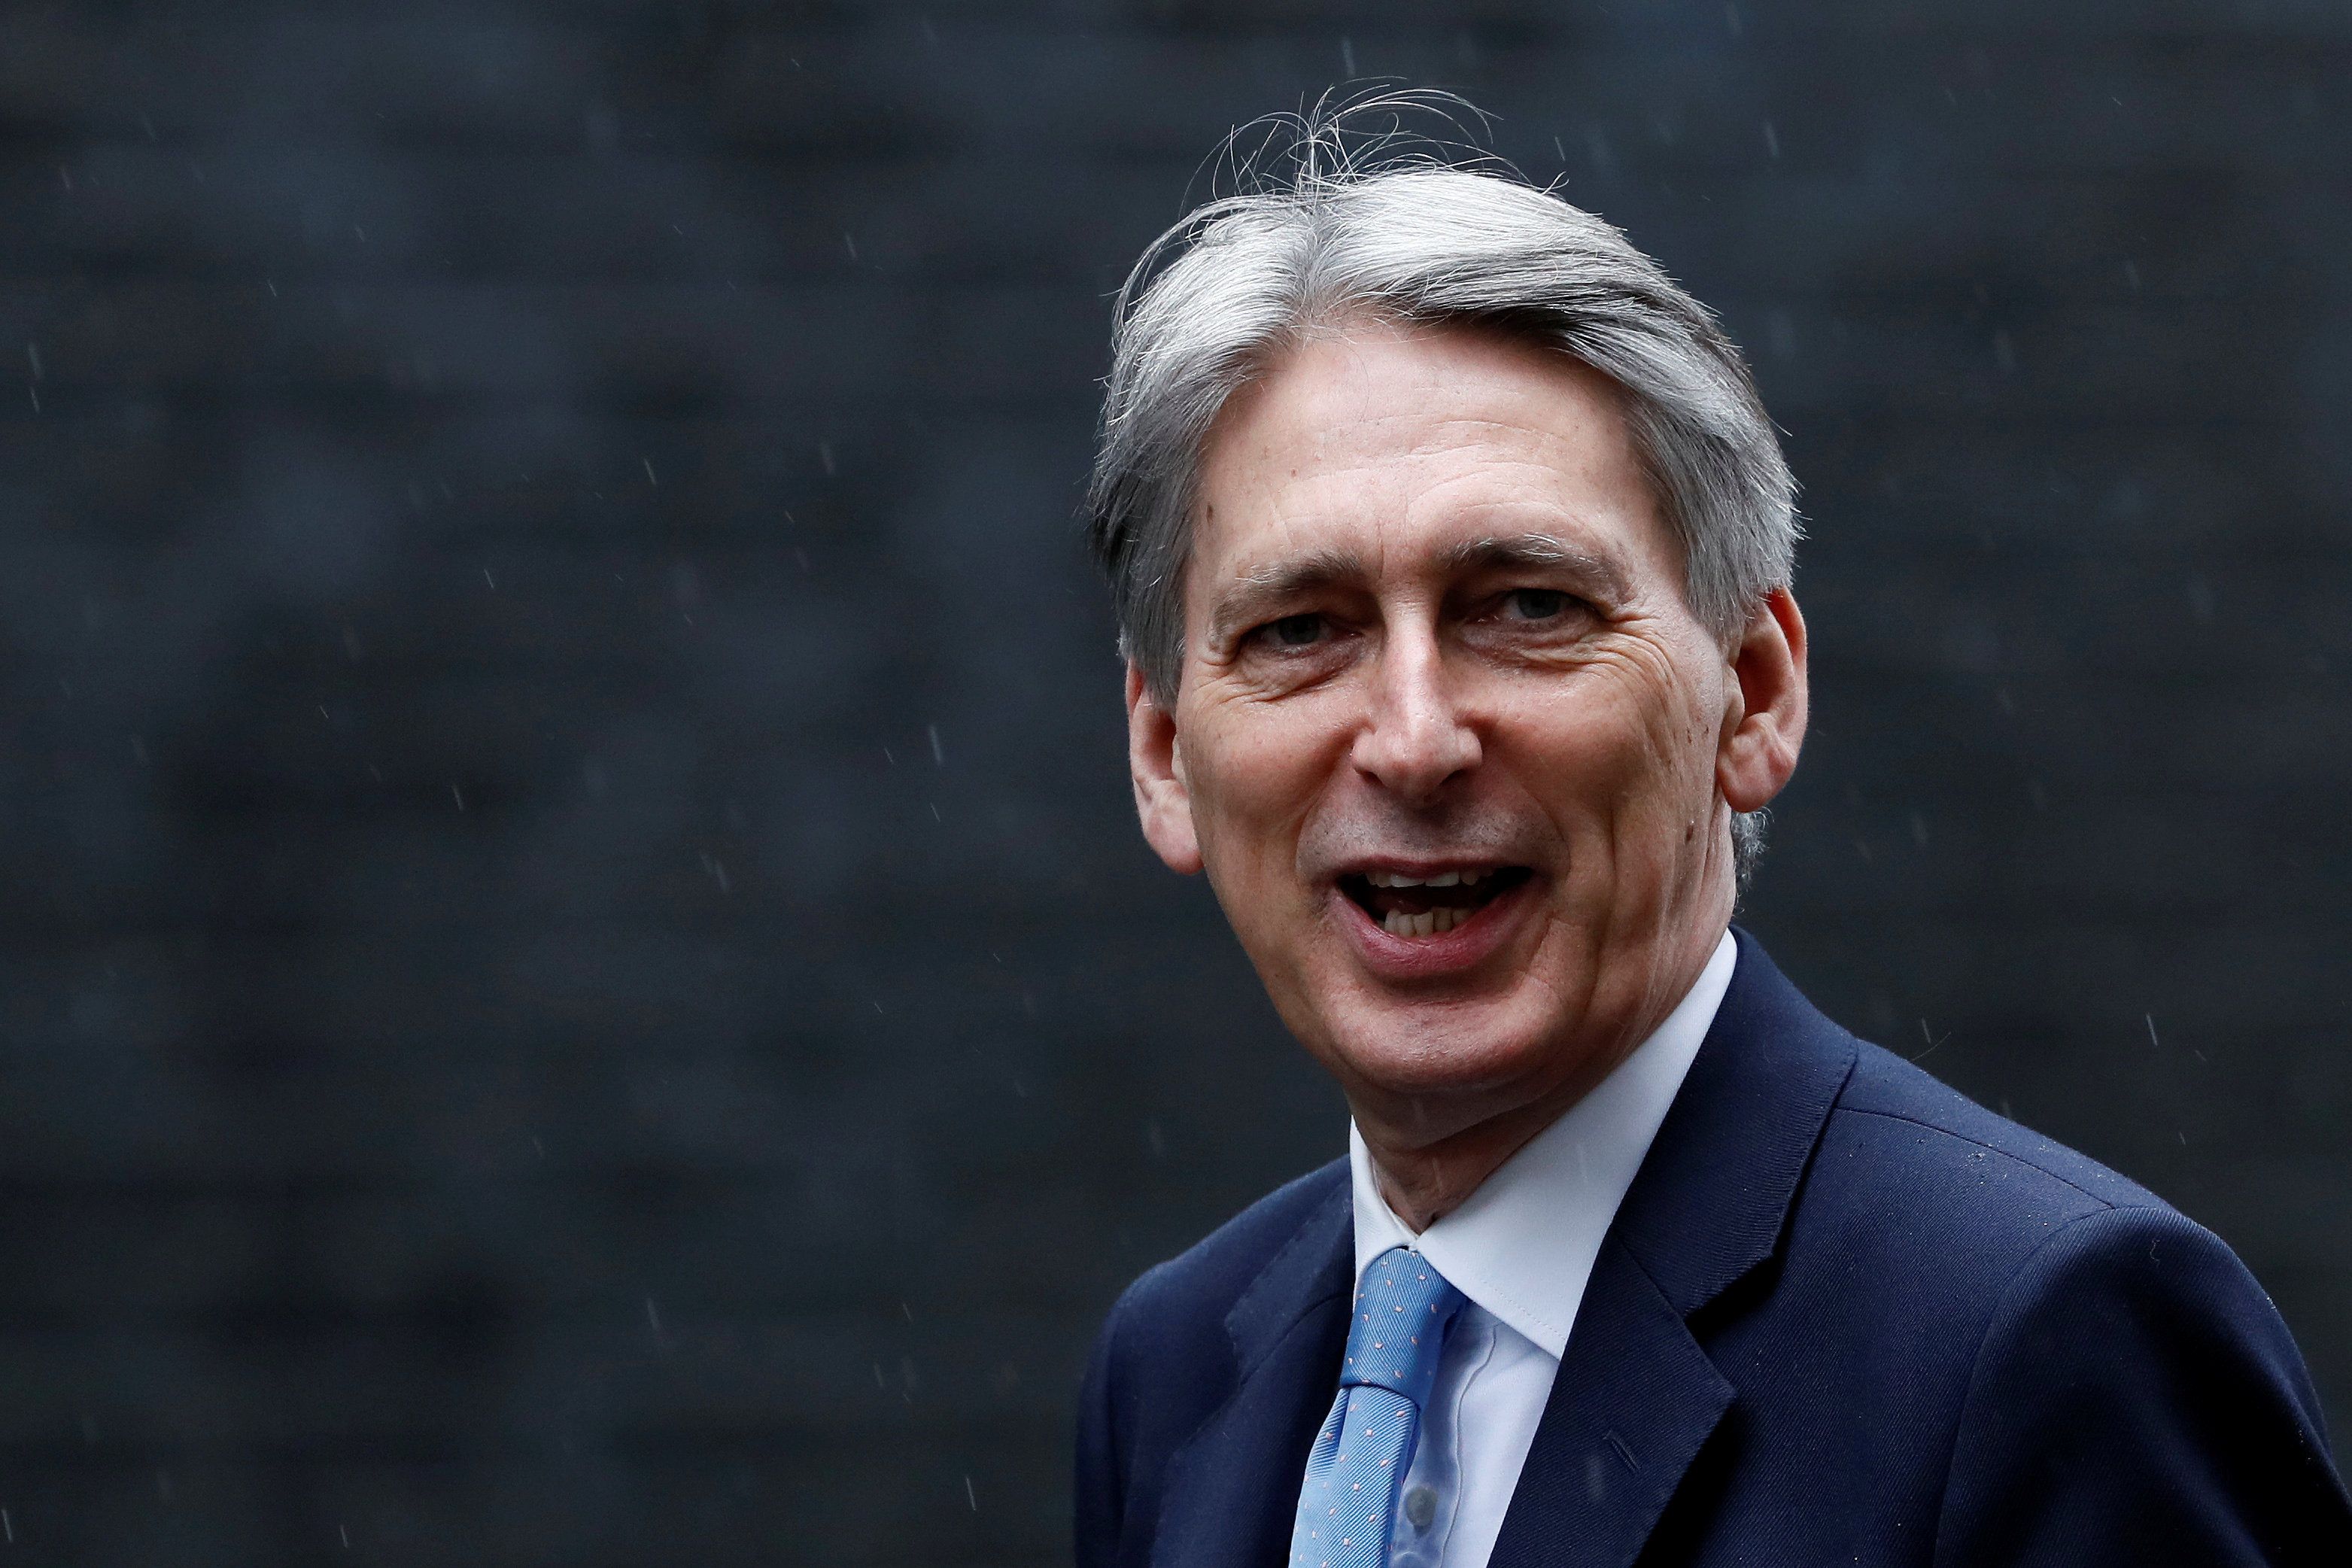 UK can cope with no-deal Brexit: Britain's Hammond